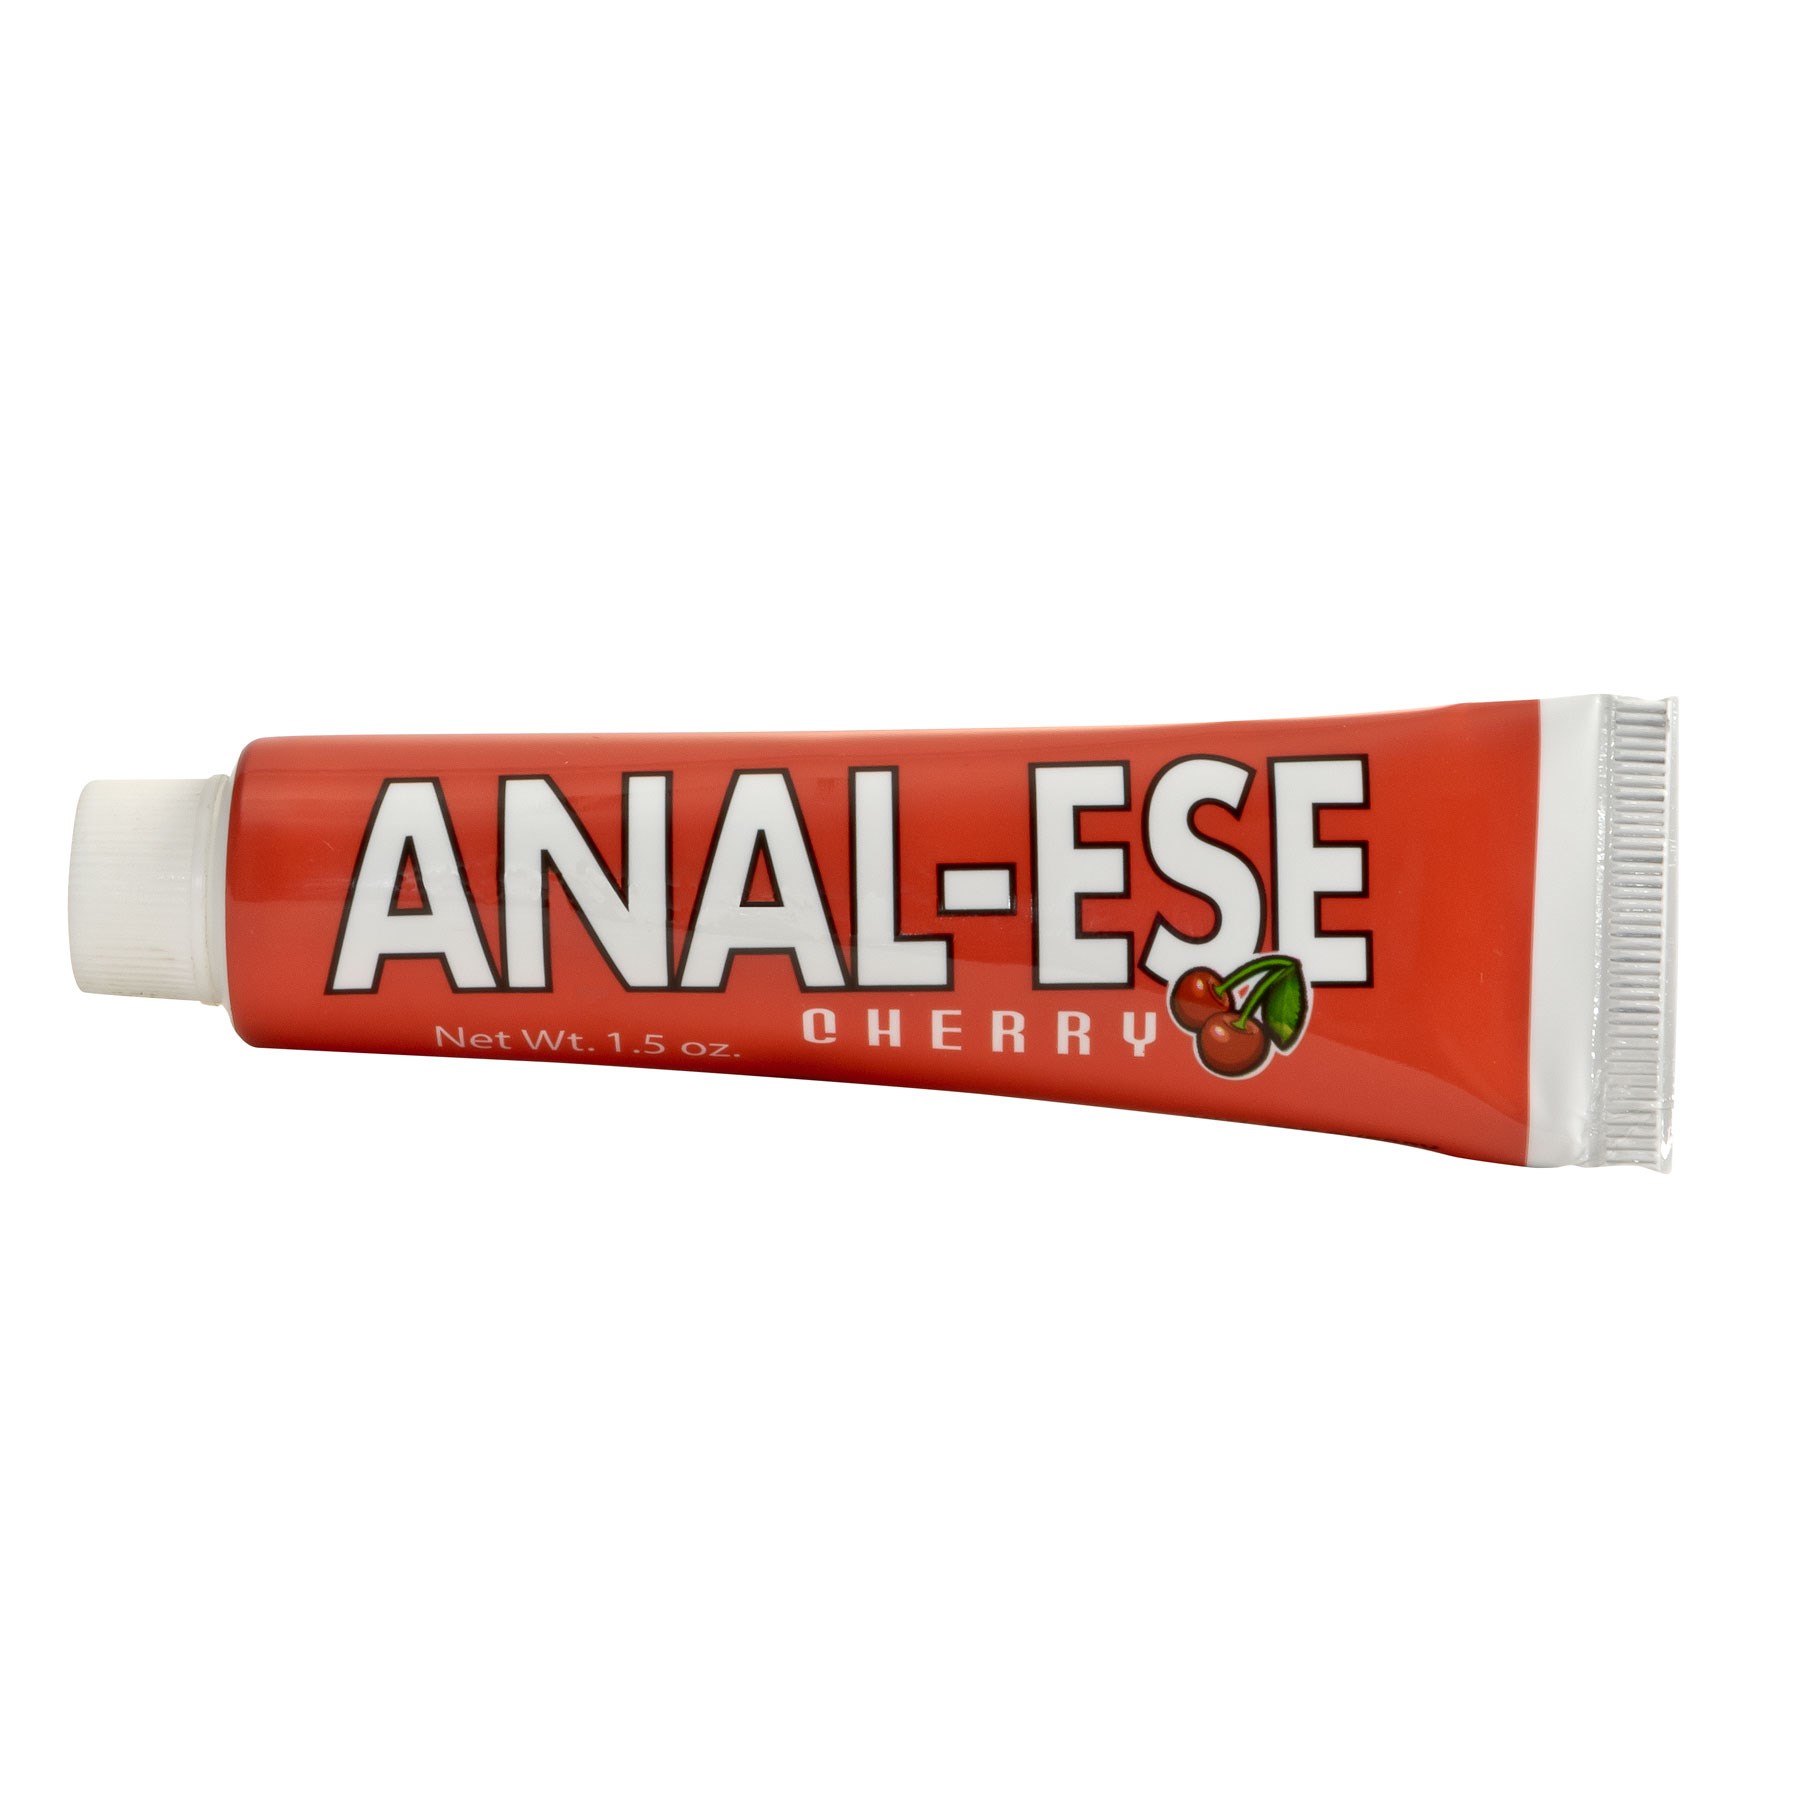 Anal-Ese